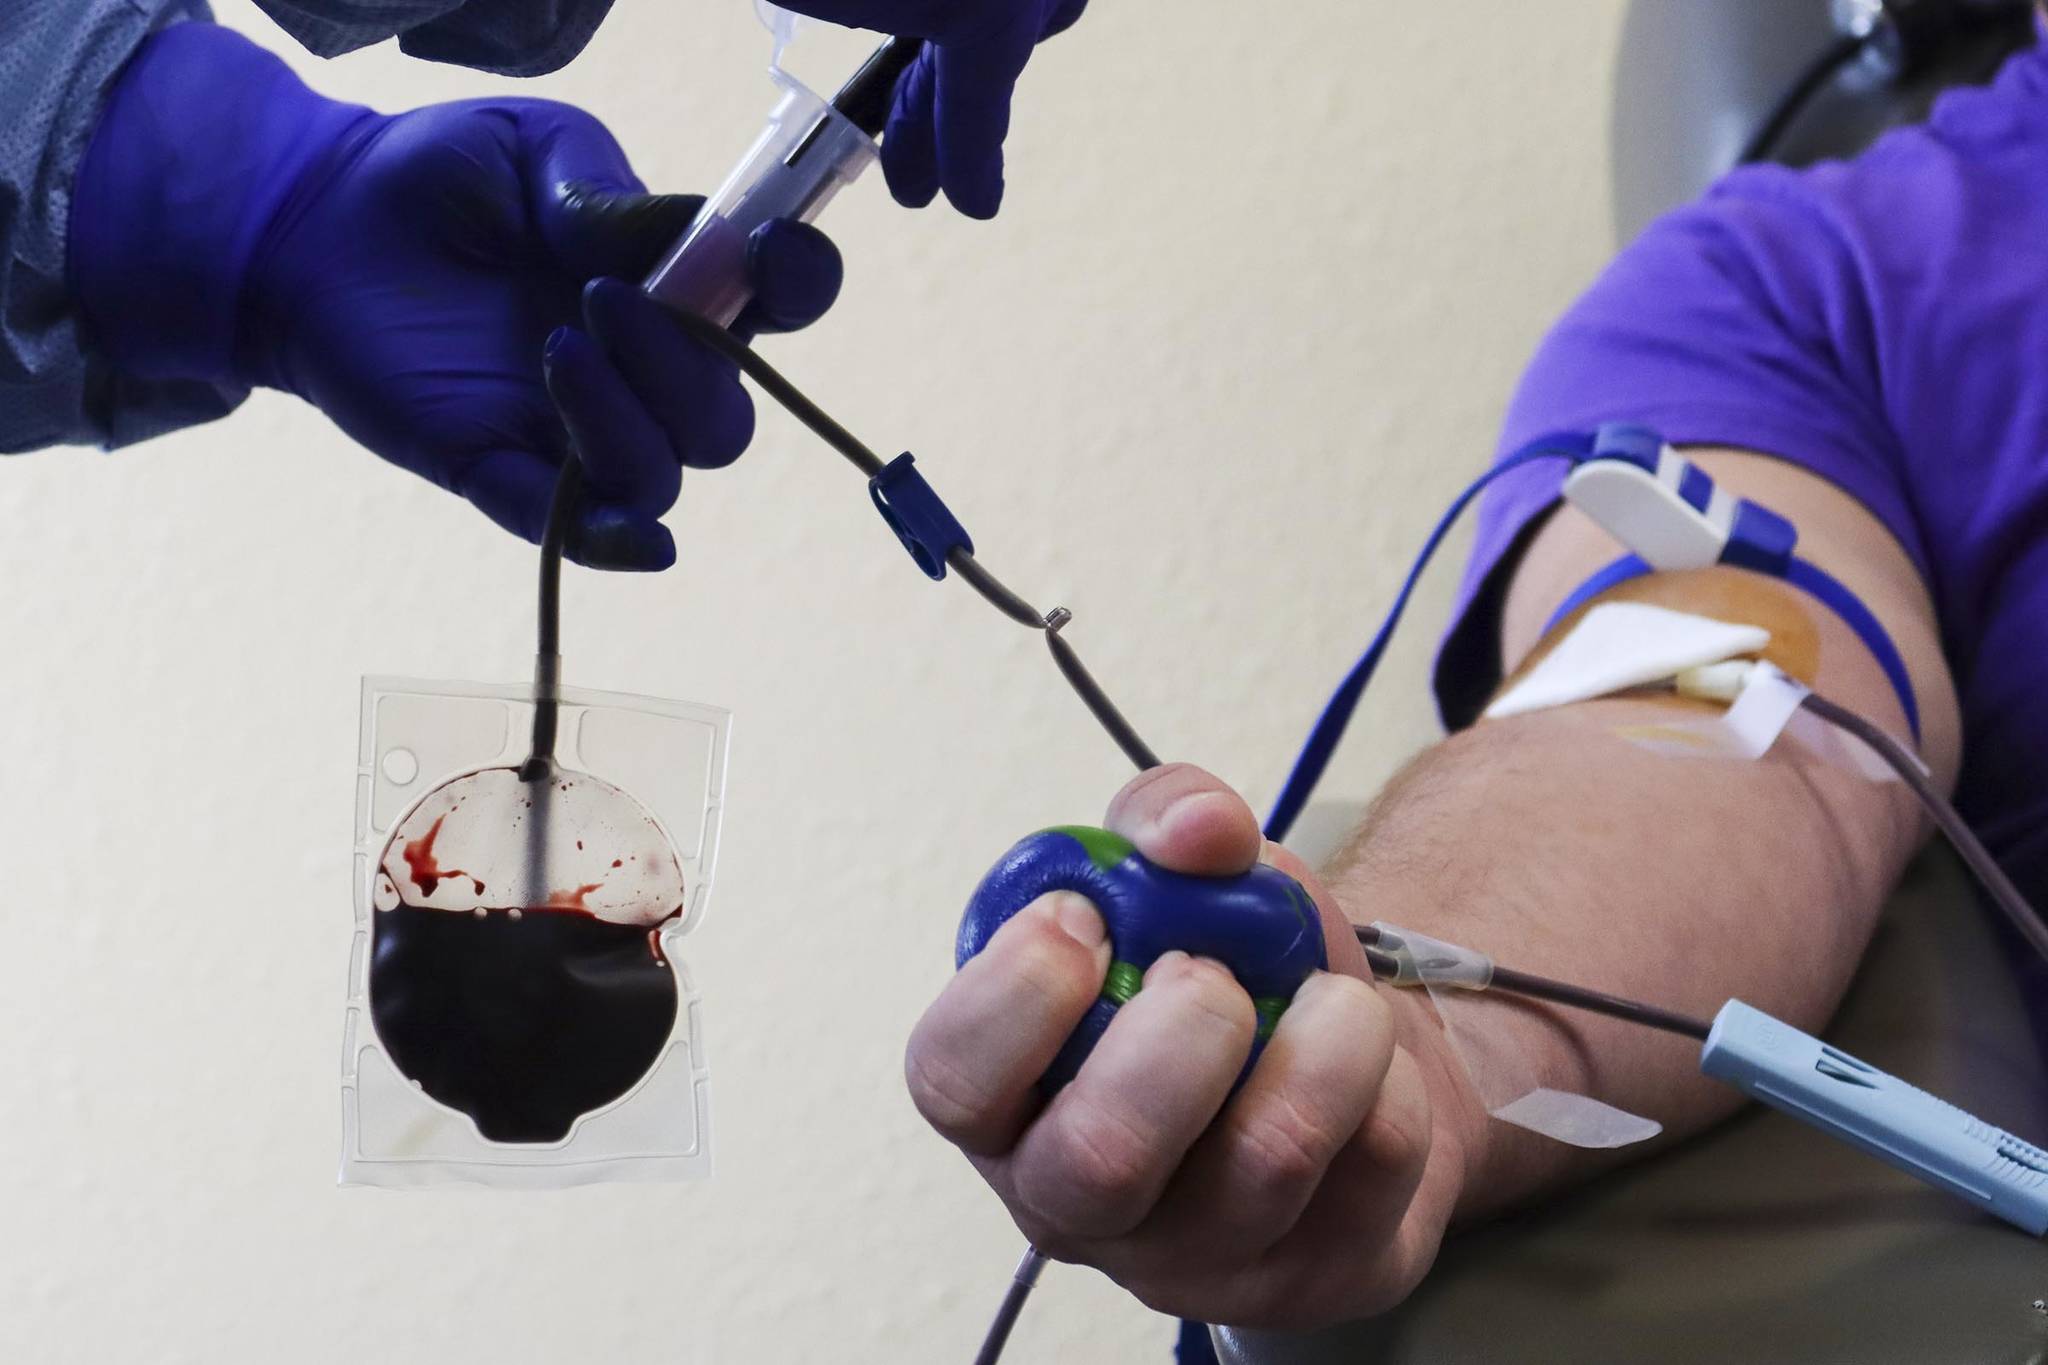 A donor gives blood at the Blood Bank of Alaska’s Juneau center on Aug. 18, 2021. The BBA is currently experiencing critical shortages of multiple blood types statewide. (Ben Hohenstatt / Juneau Empire)